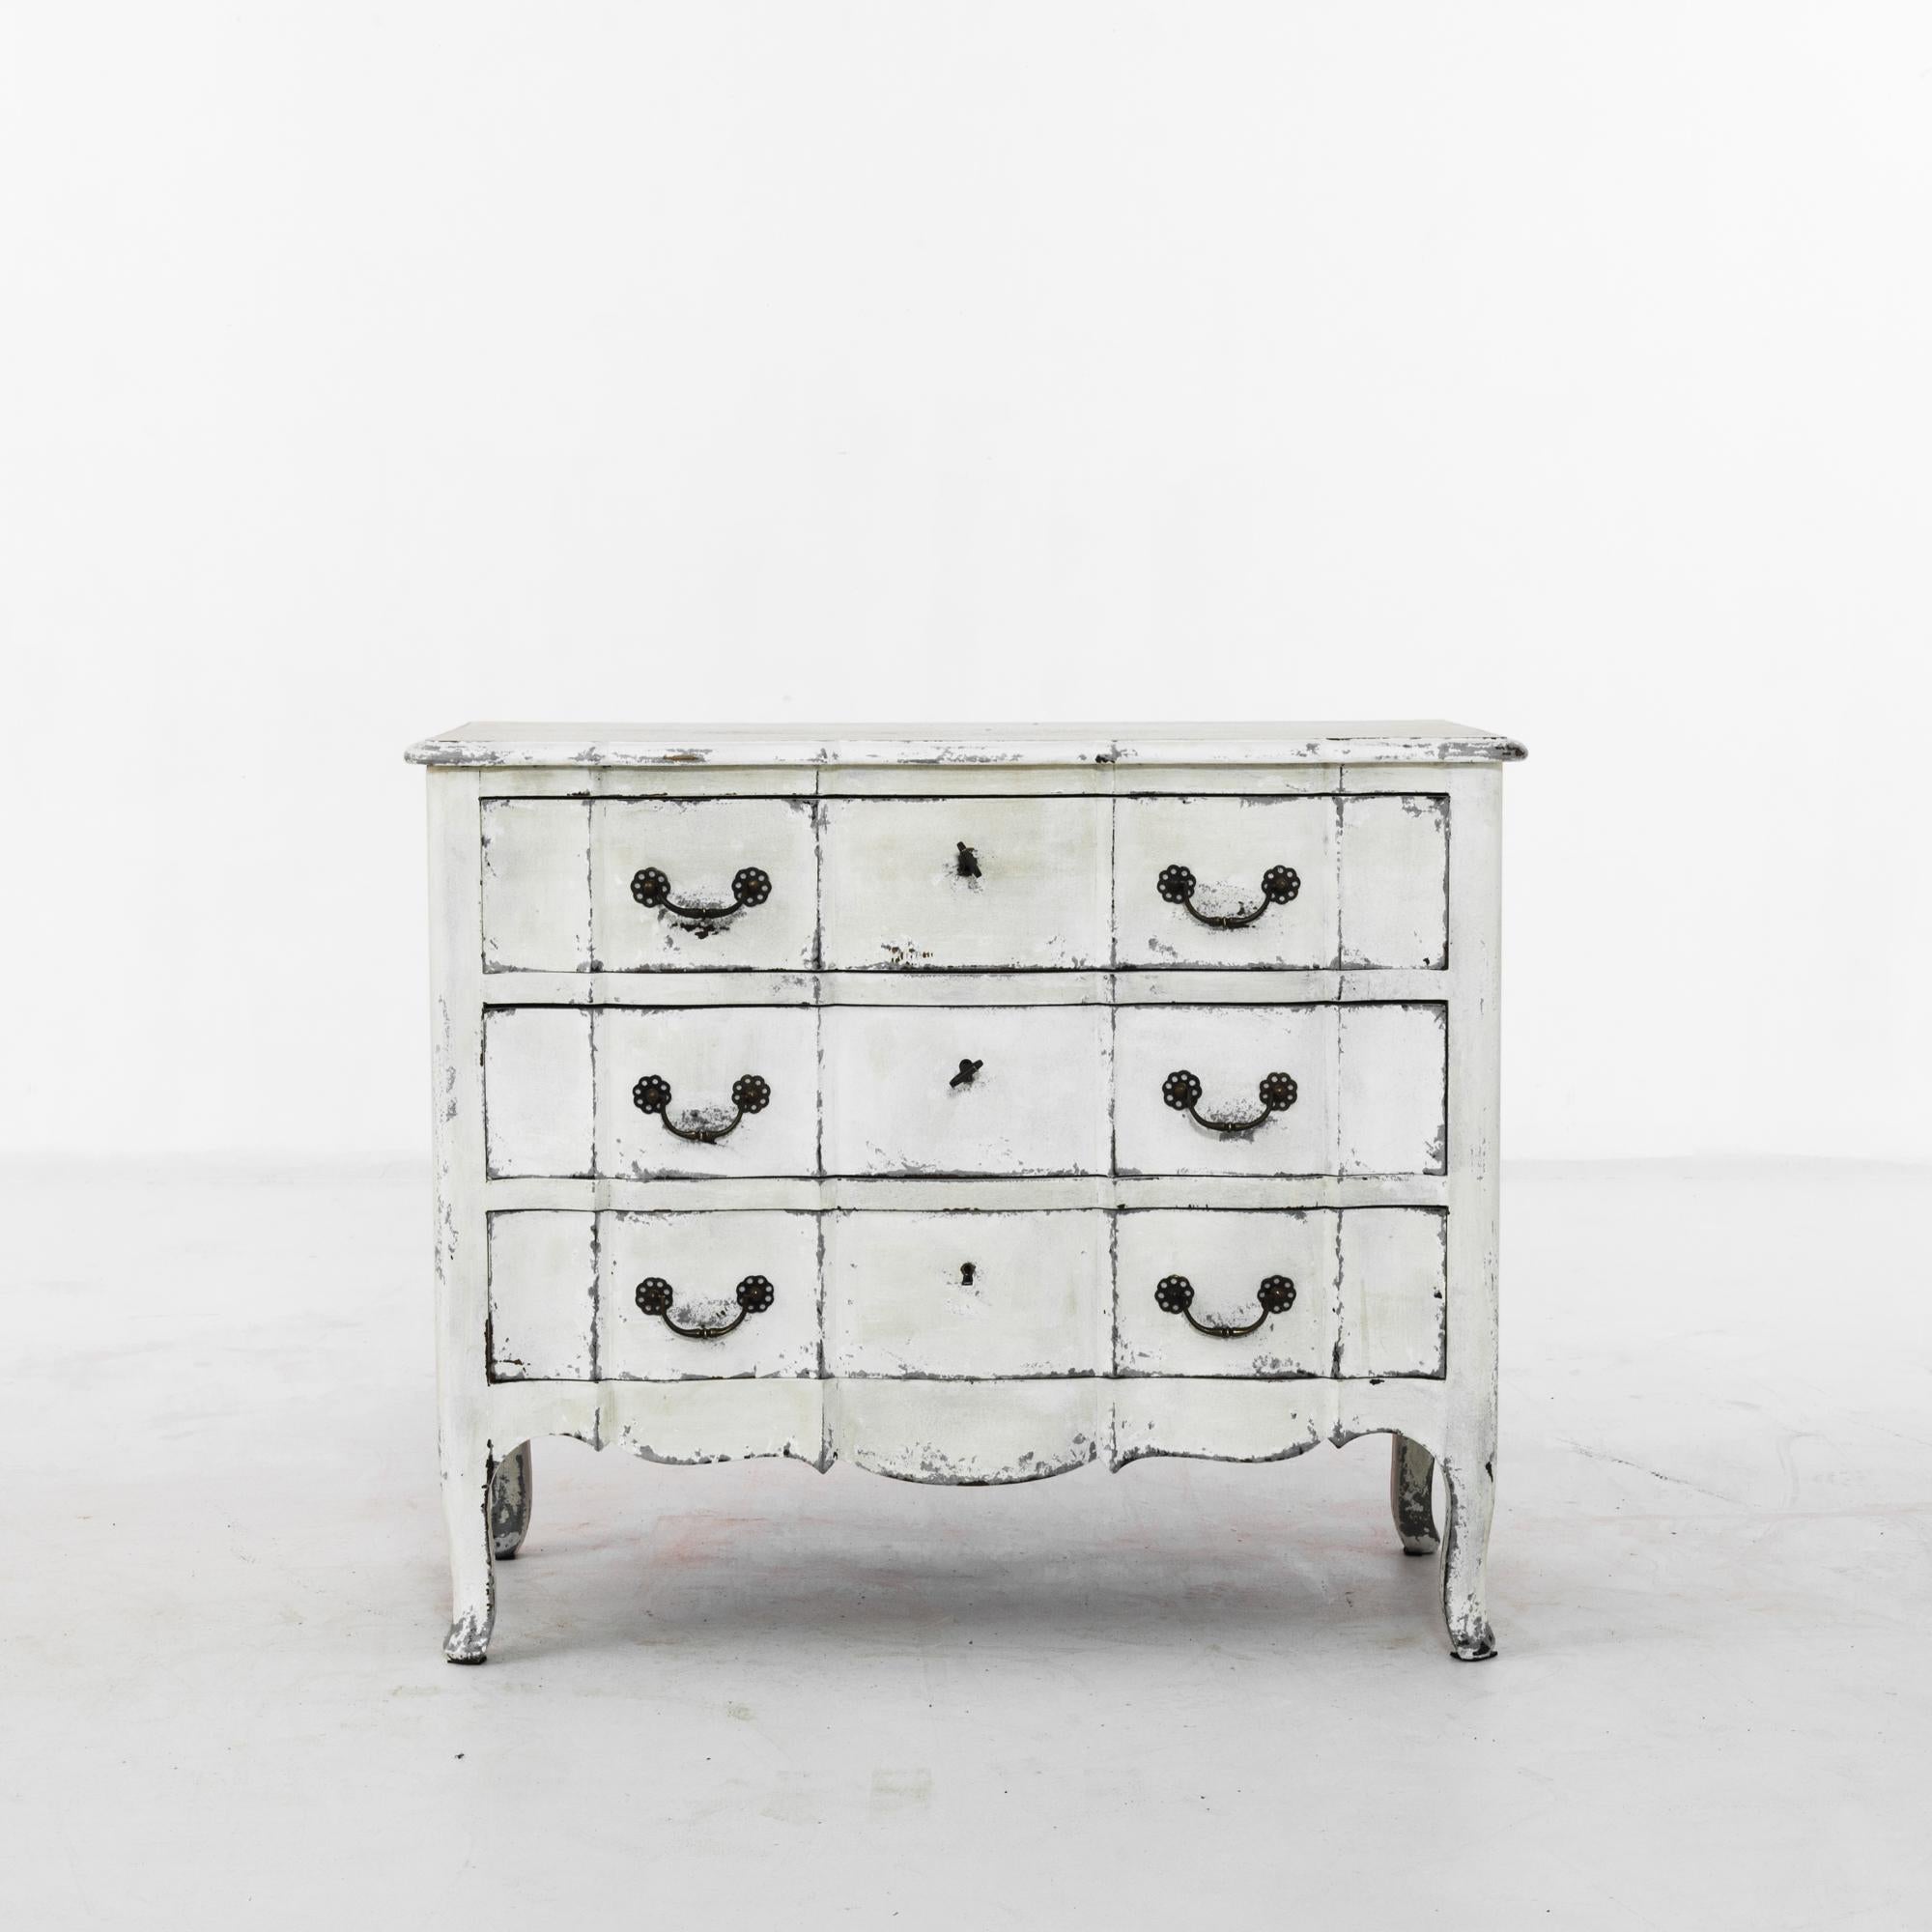 This wooden chest of drawers was made in France, circa 1920. Cabriole legs and a scalloped apron give it a French Provincial touch. The chest houses three drawers, with locks for the upper two. Finished with a distressed white patina, highlighting